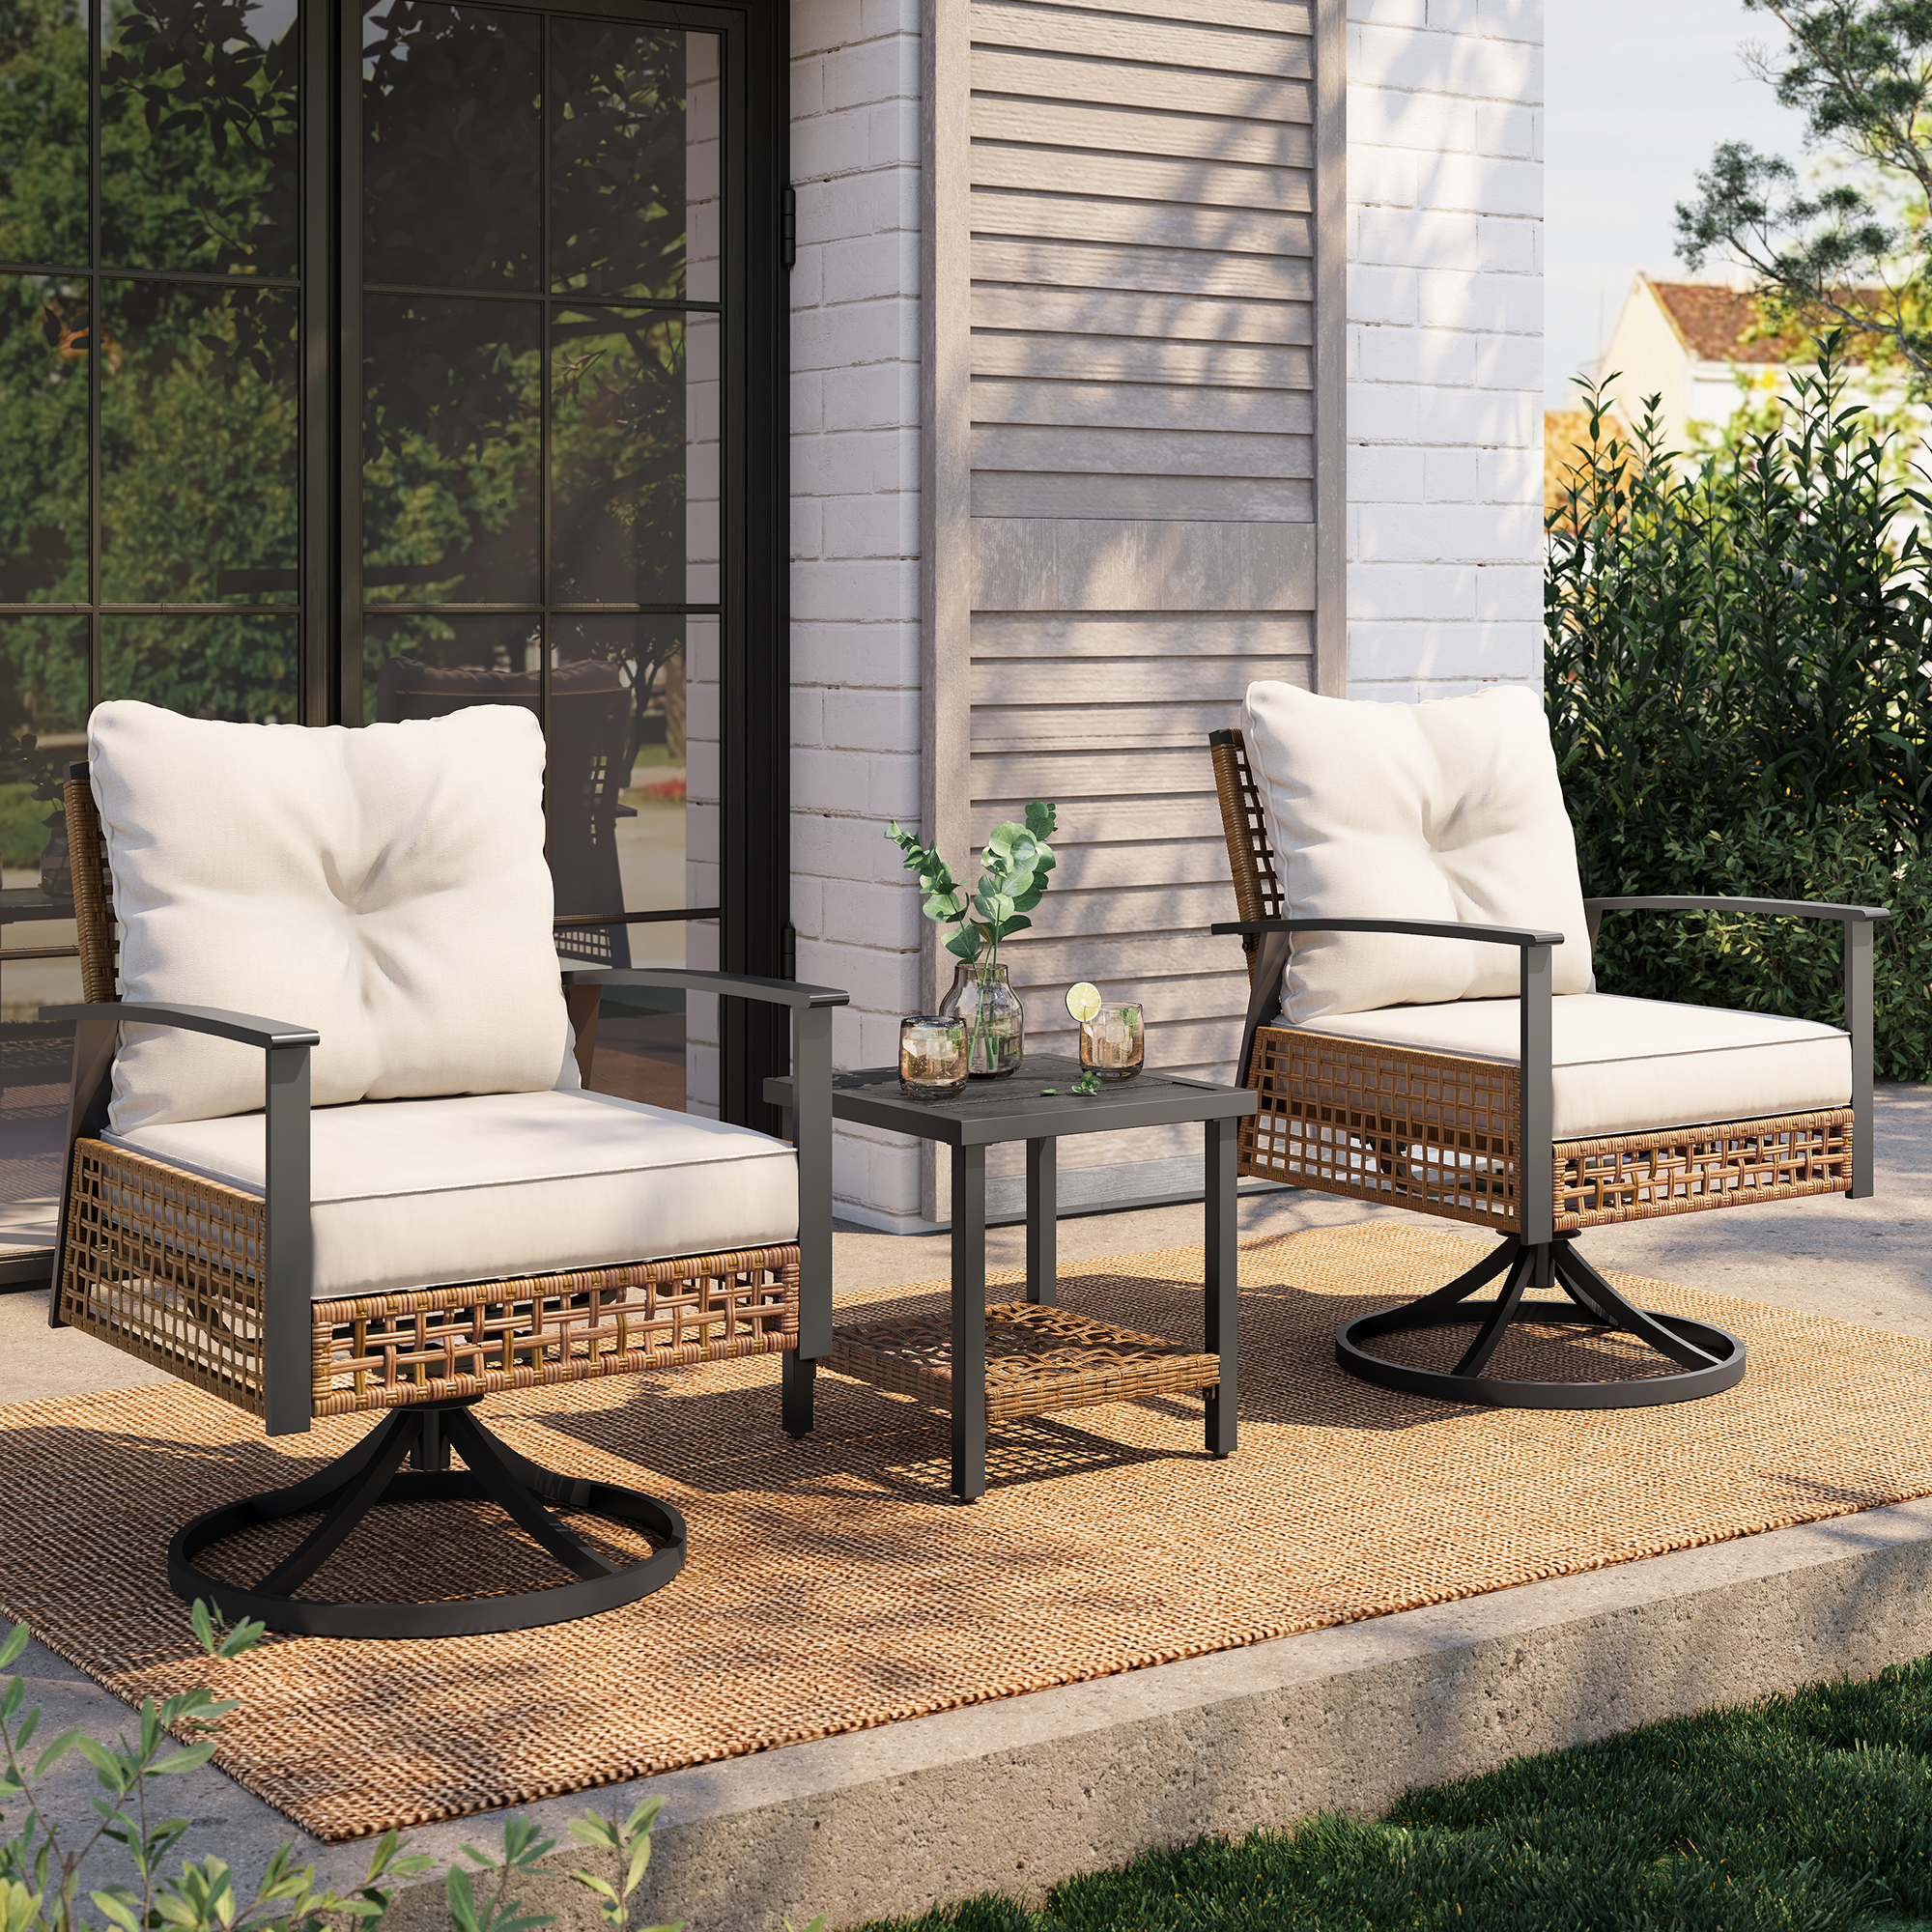 LAUSAINT HOME 3 PCS Patio Conversation Set, Outdoor Swivel Set with PE Rattan Swivel Rocking Chairs & Coffee Table, Beige - image 4 of 9